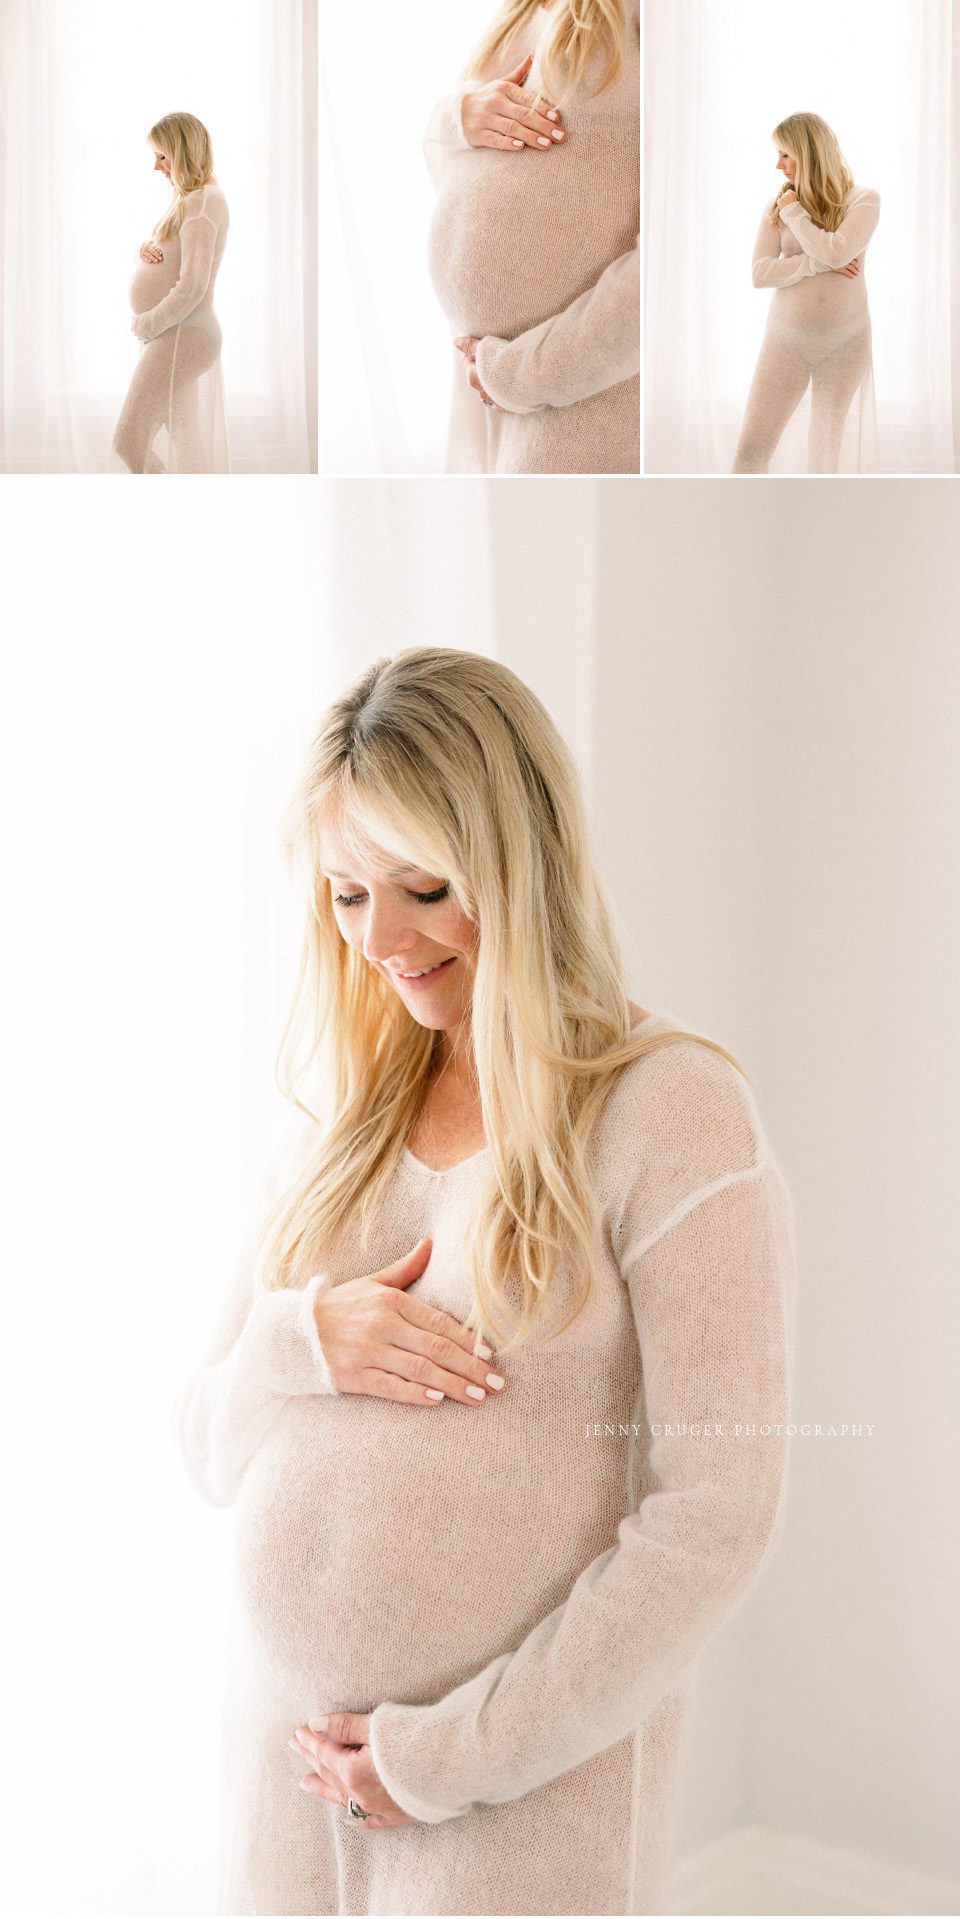 simple and intimate maternity session ideas